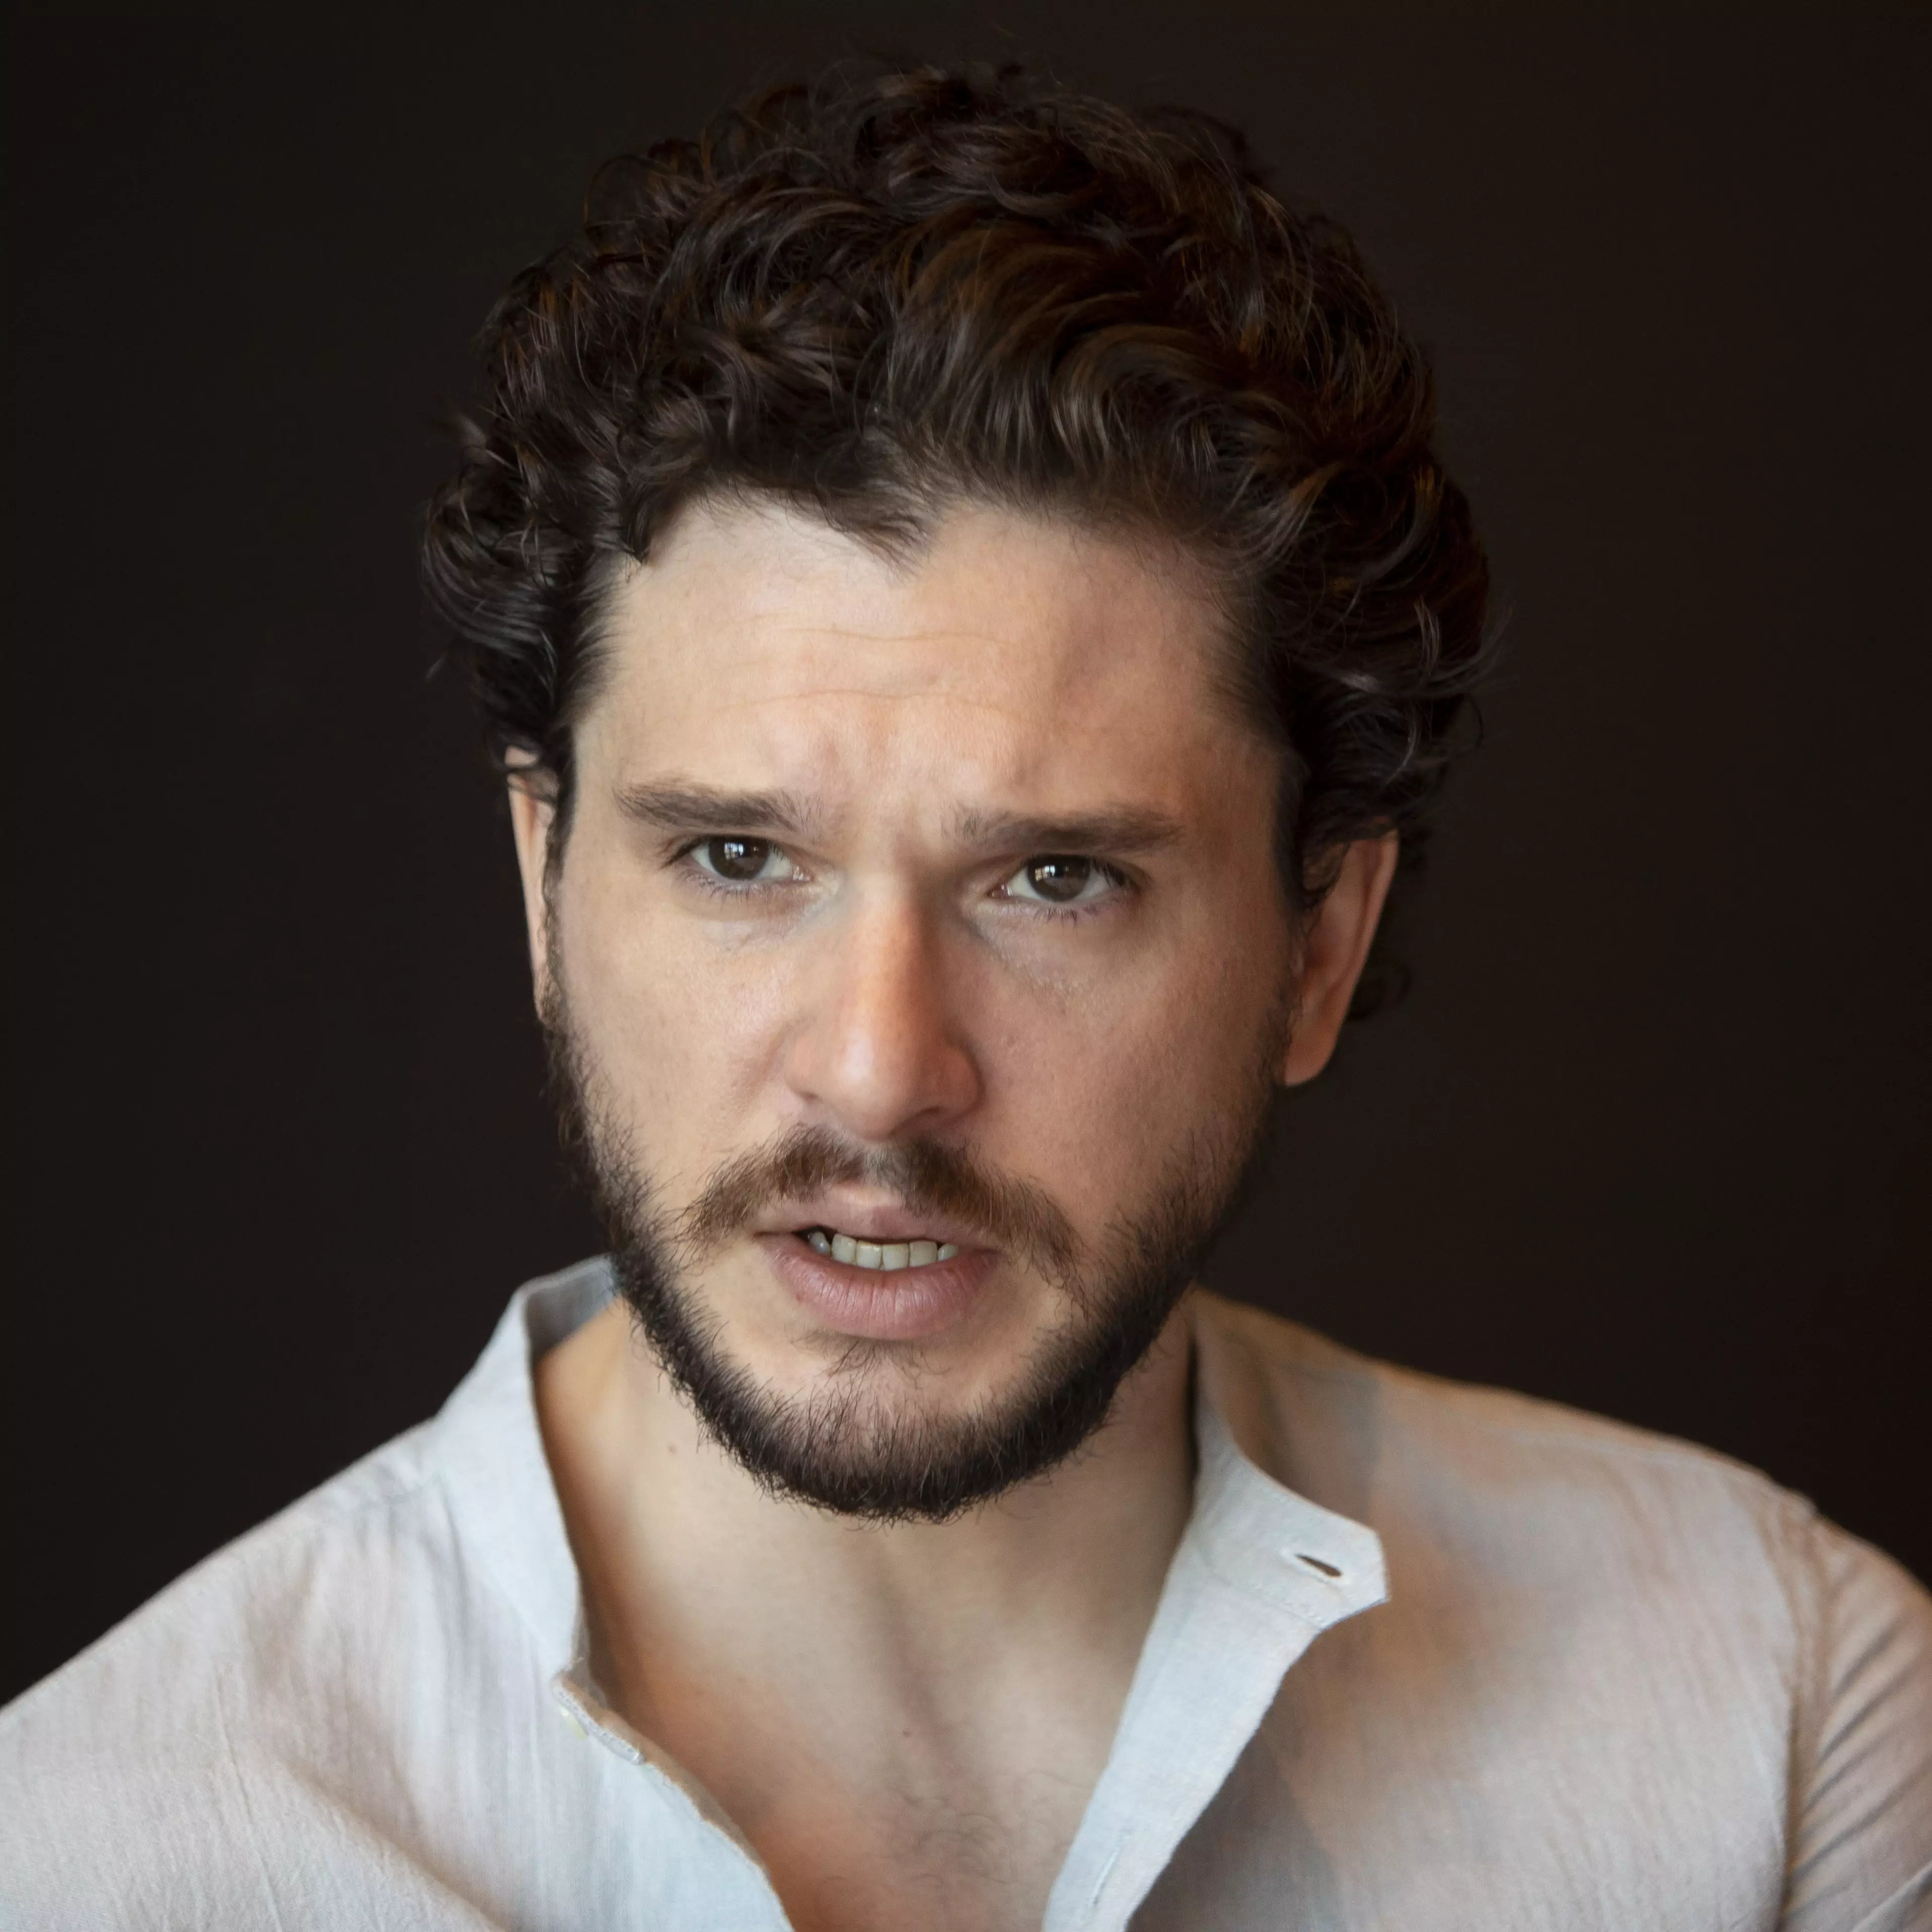 Fans are already speculating about who Harington could play.